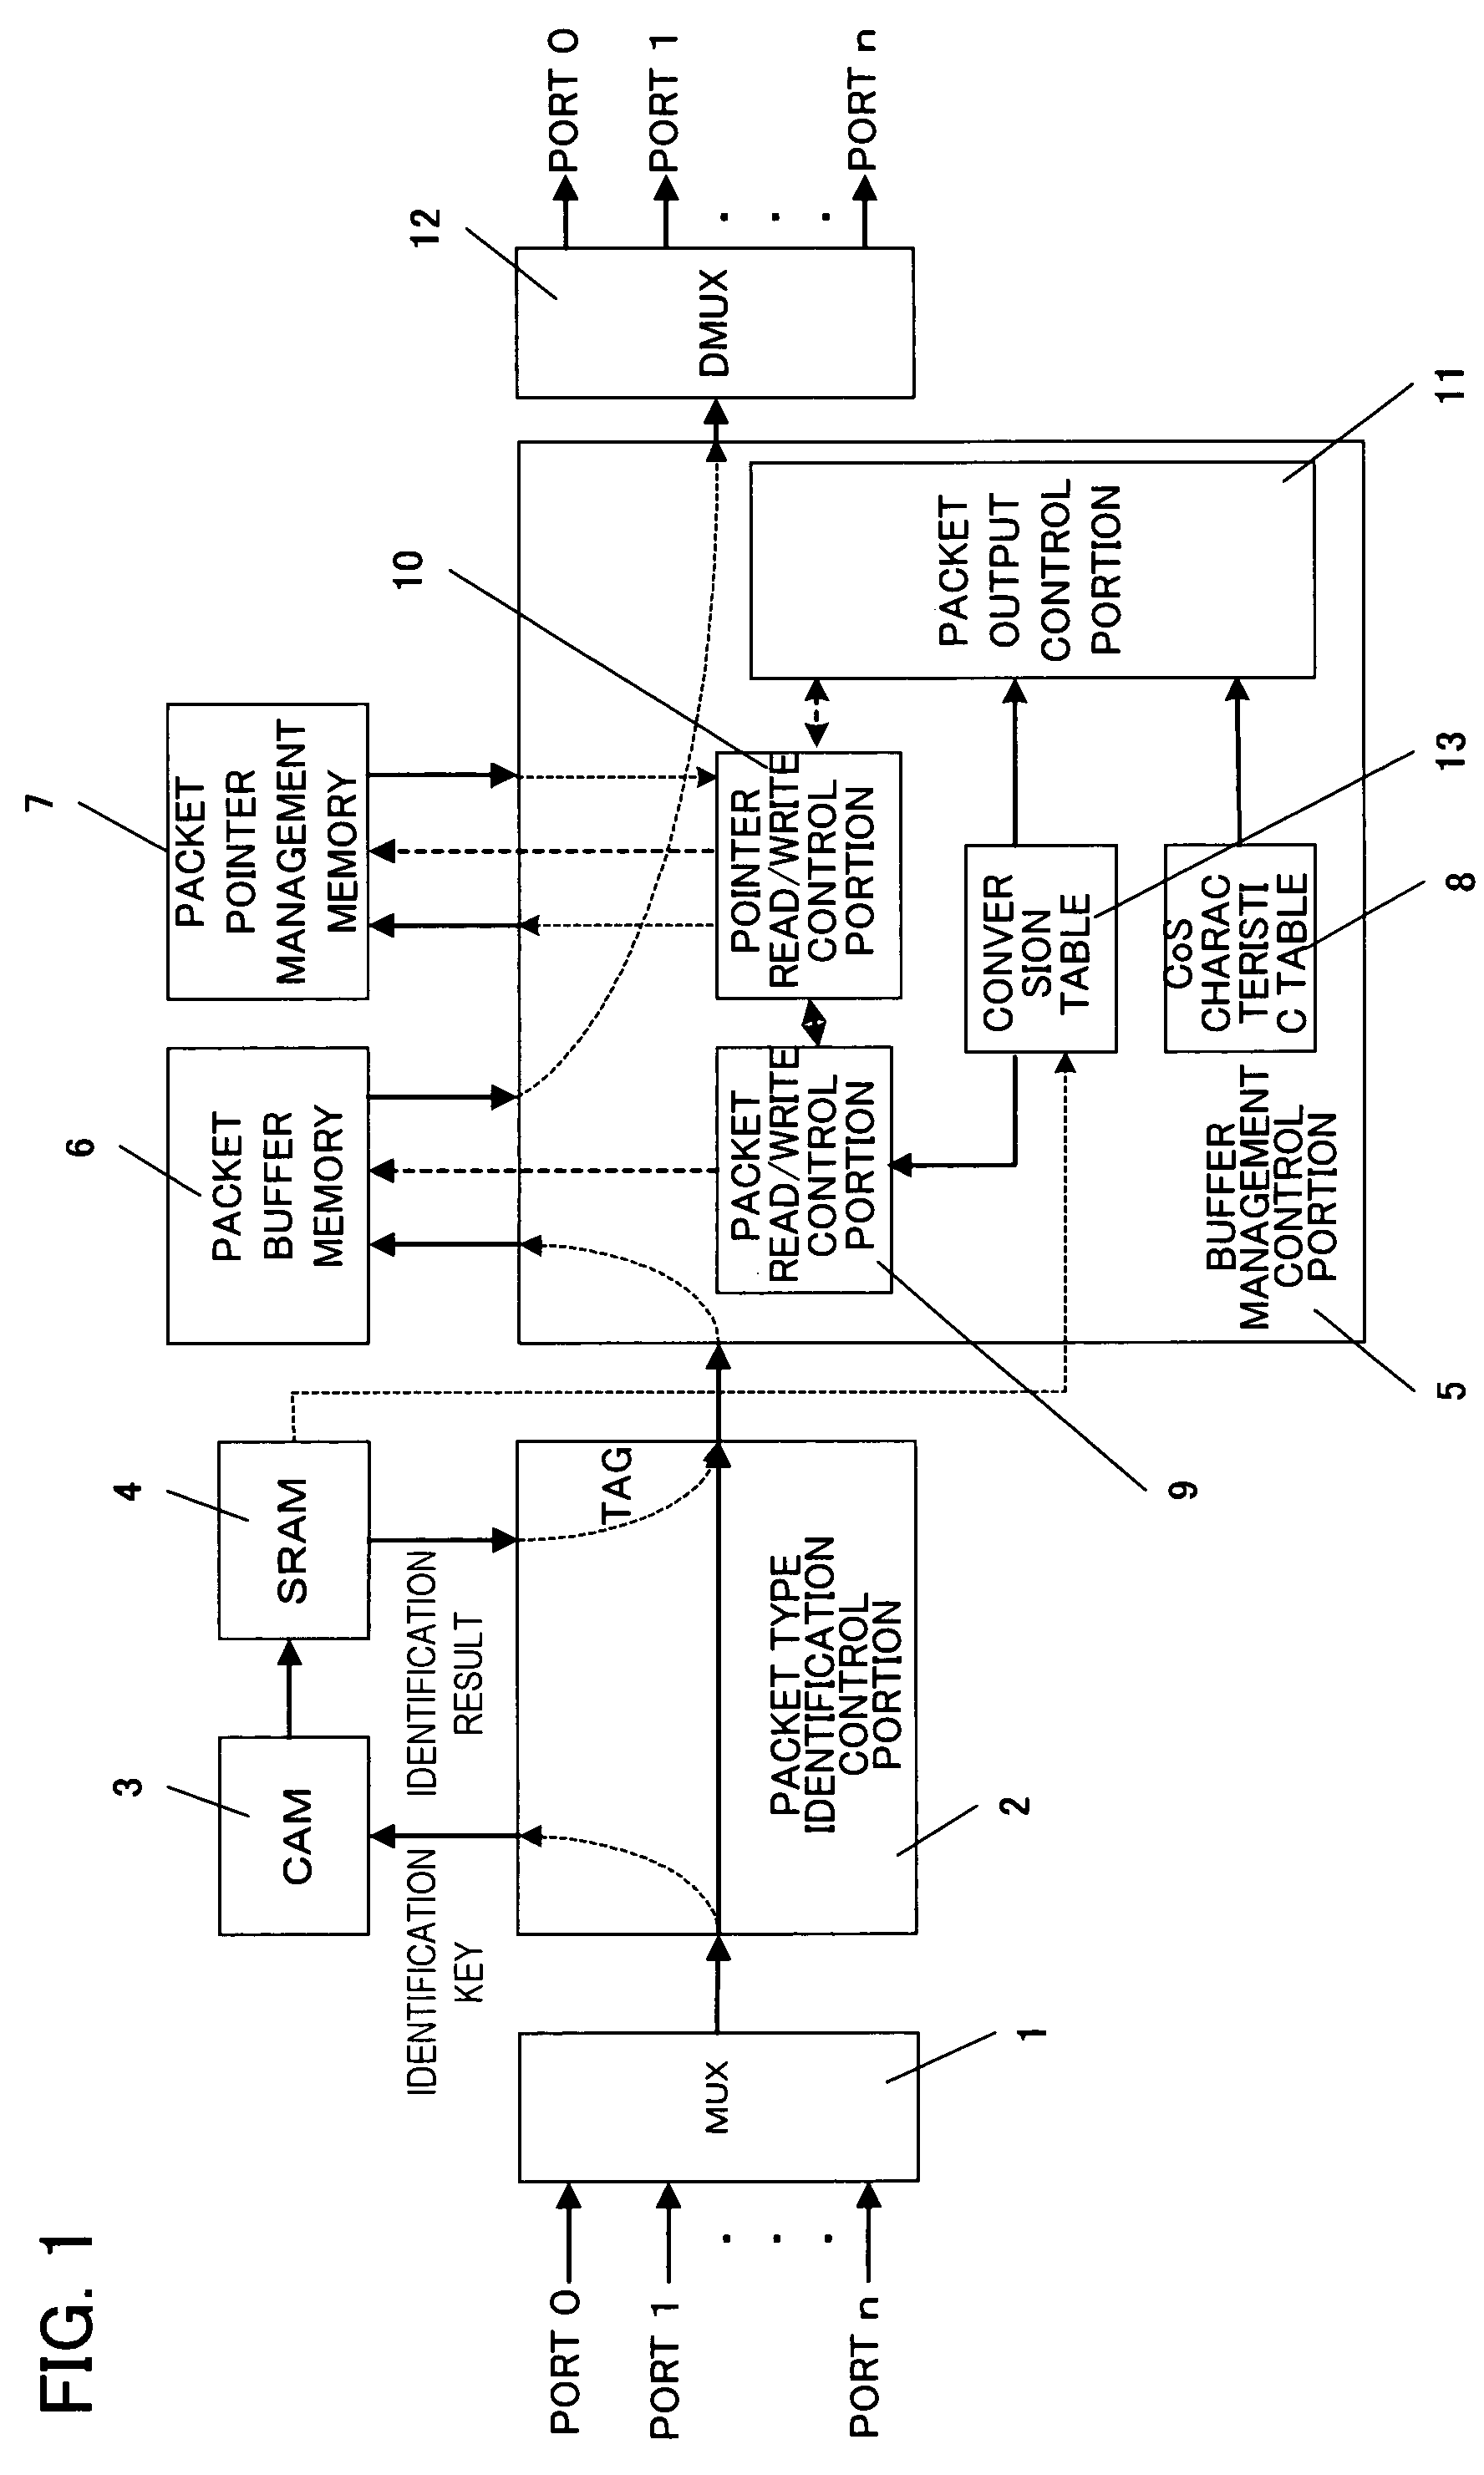 Buffer memory management method and system